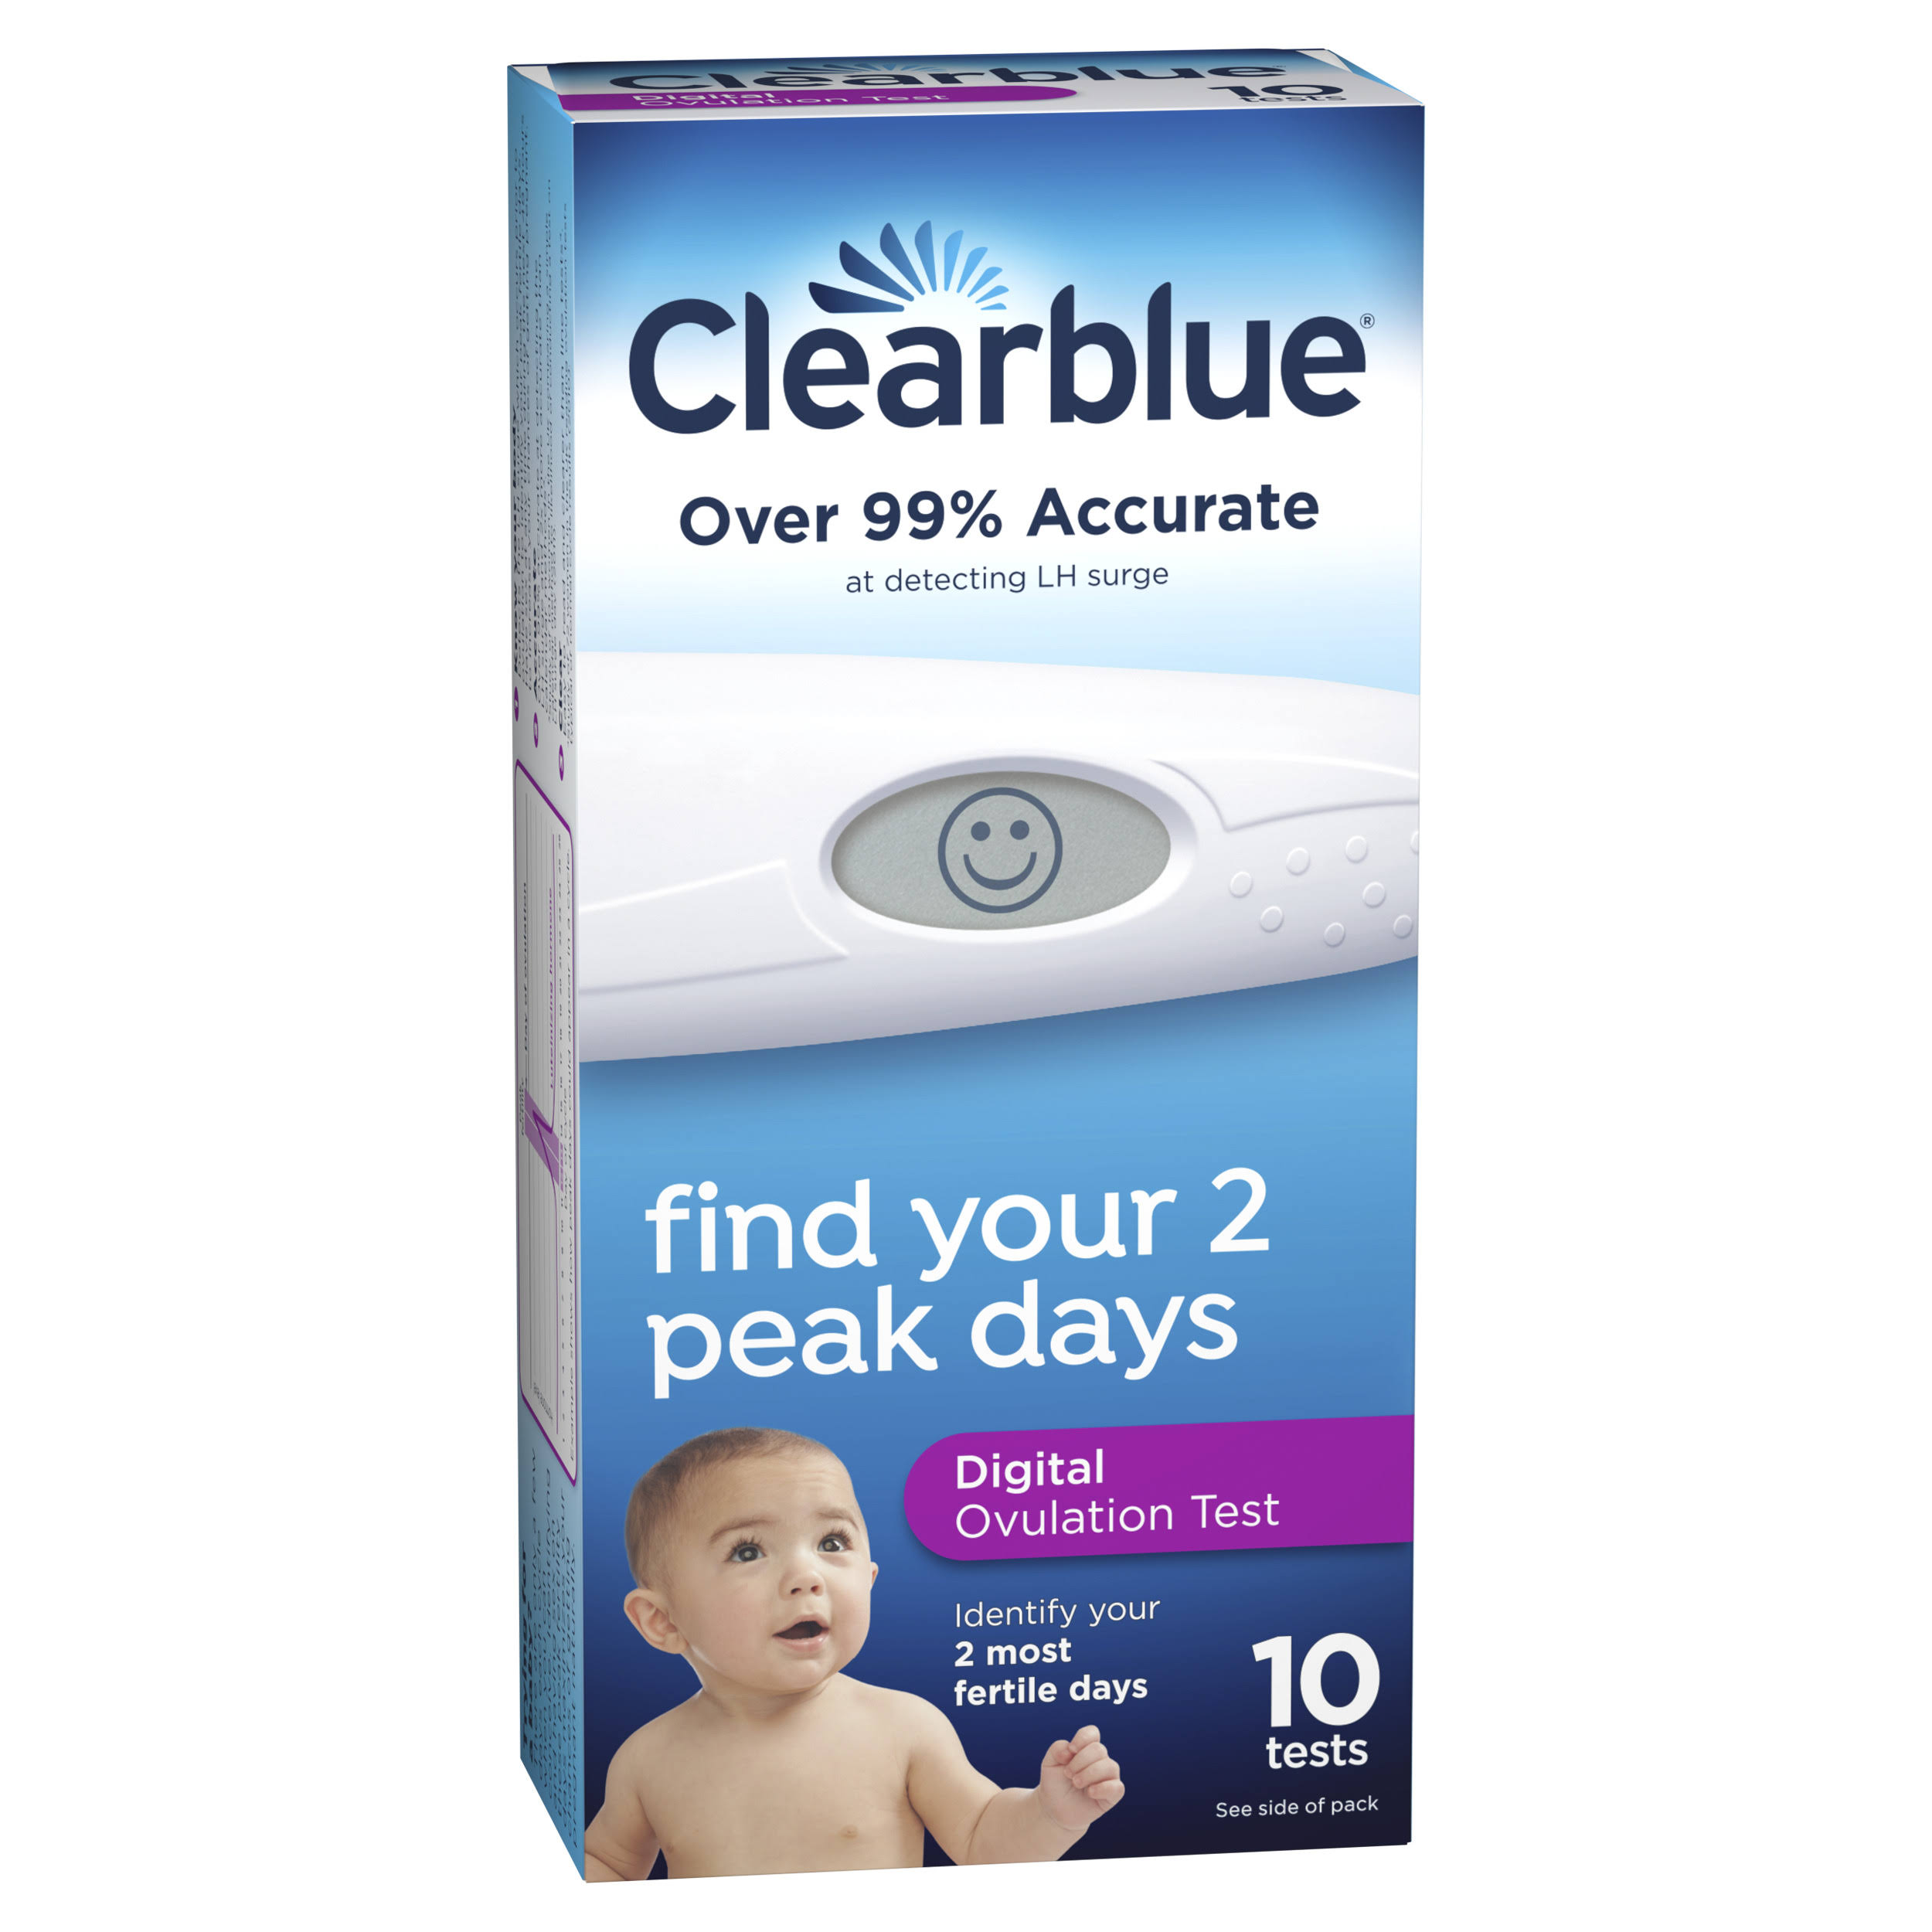 Clearblue Ovulation Test, Digital - 10 tests